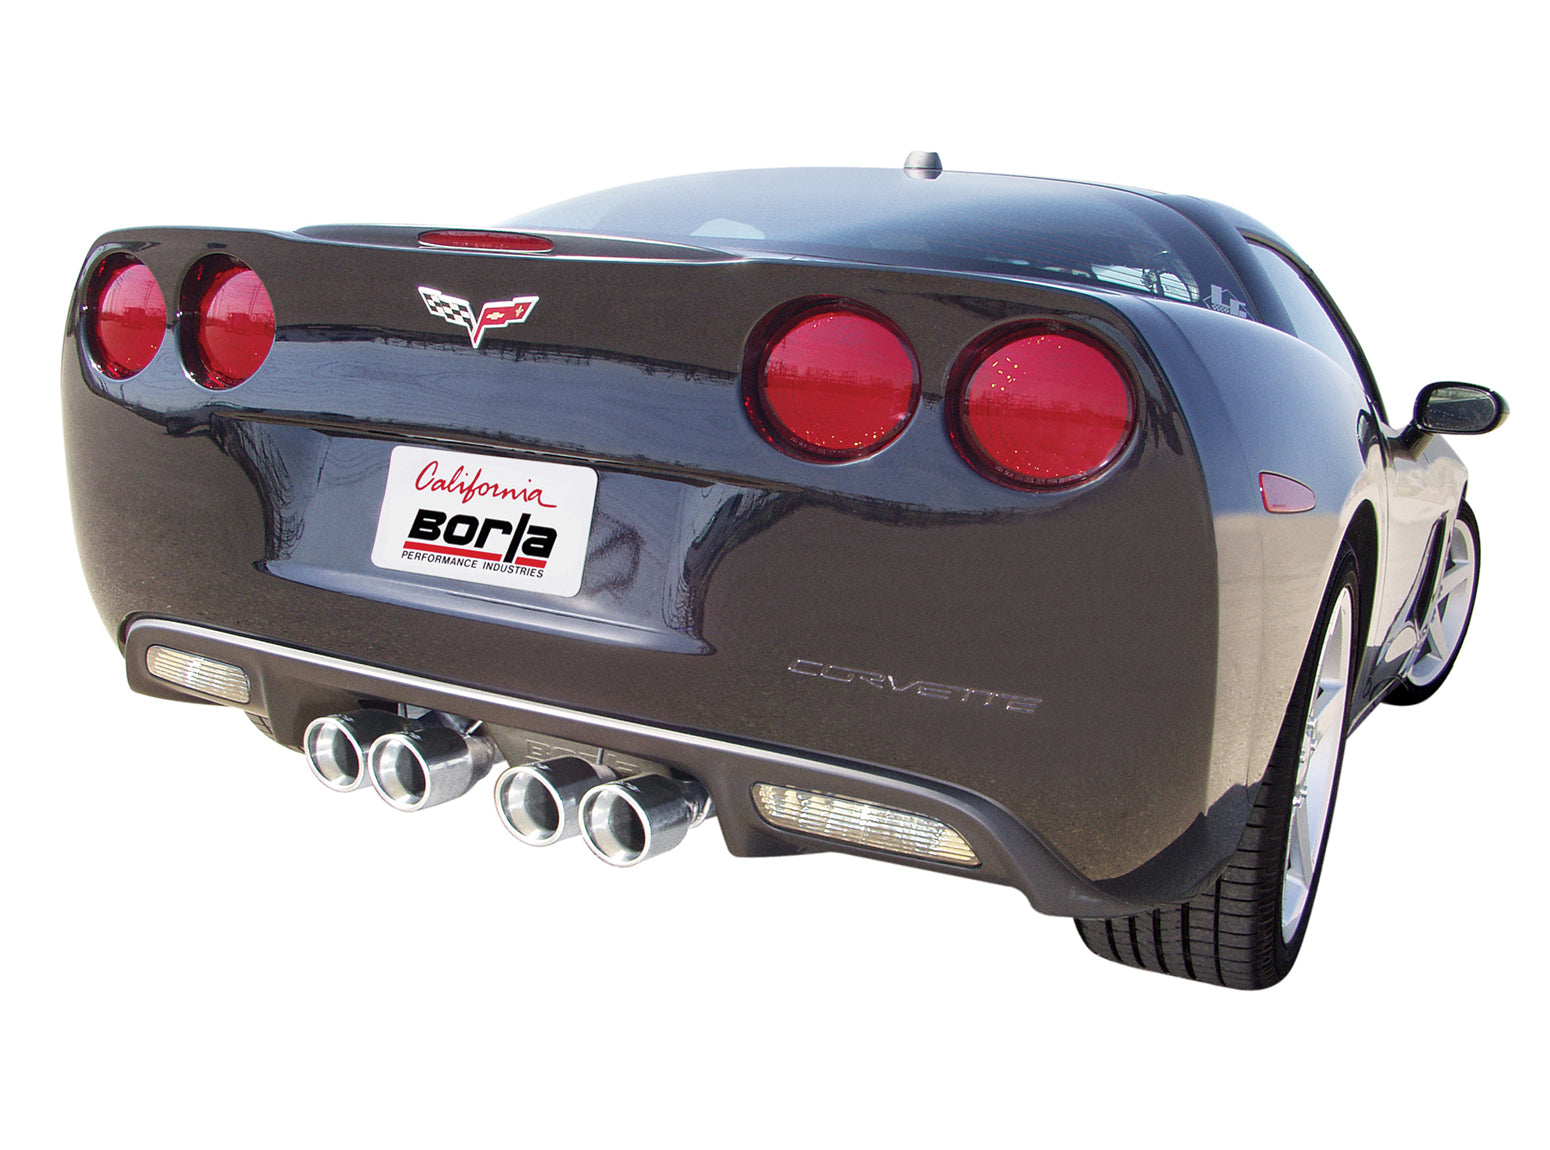 BORLA 60089 Exhaust System X-Pipes, Mid-Pipes, & Down-Pipes CORV 05 C6 6.0L V8 AT / MT RWD Photo-1 